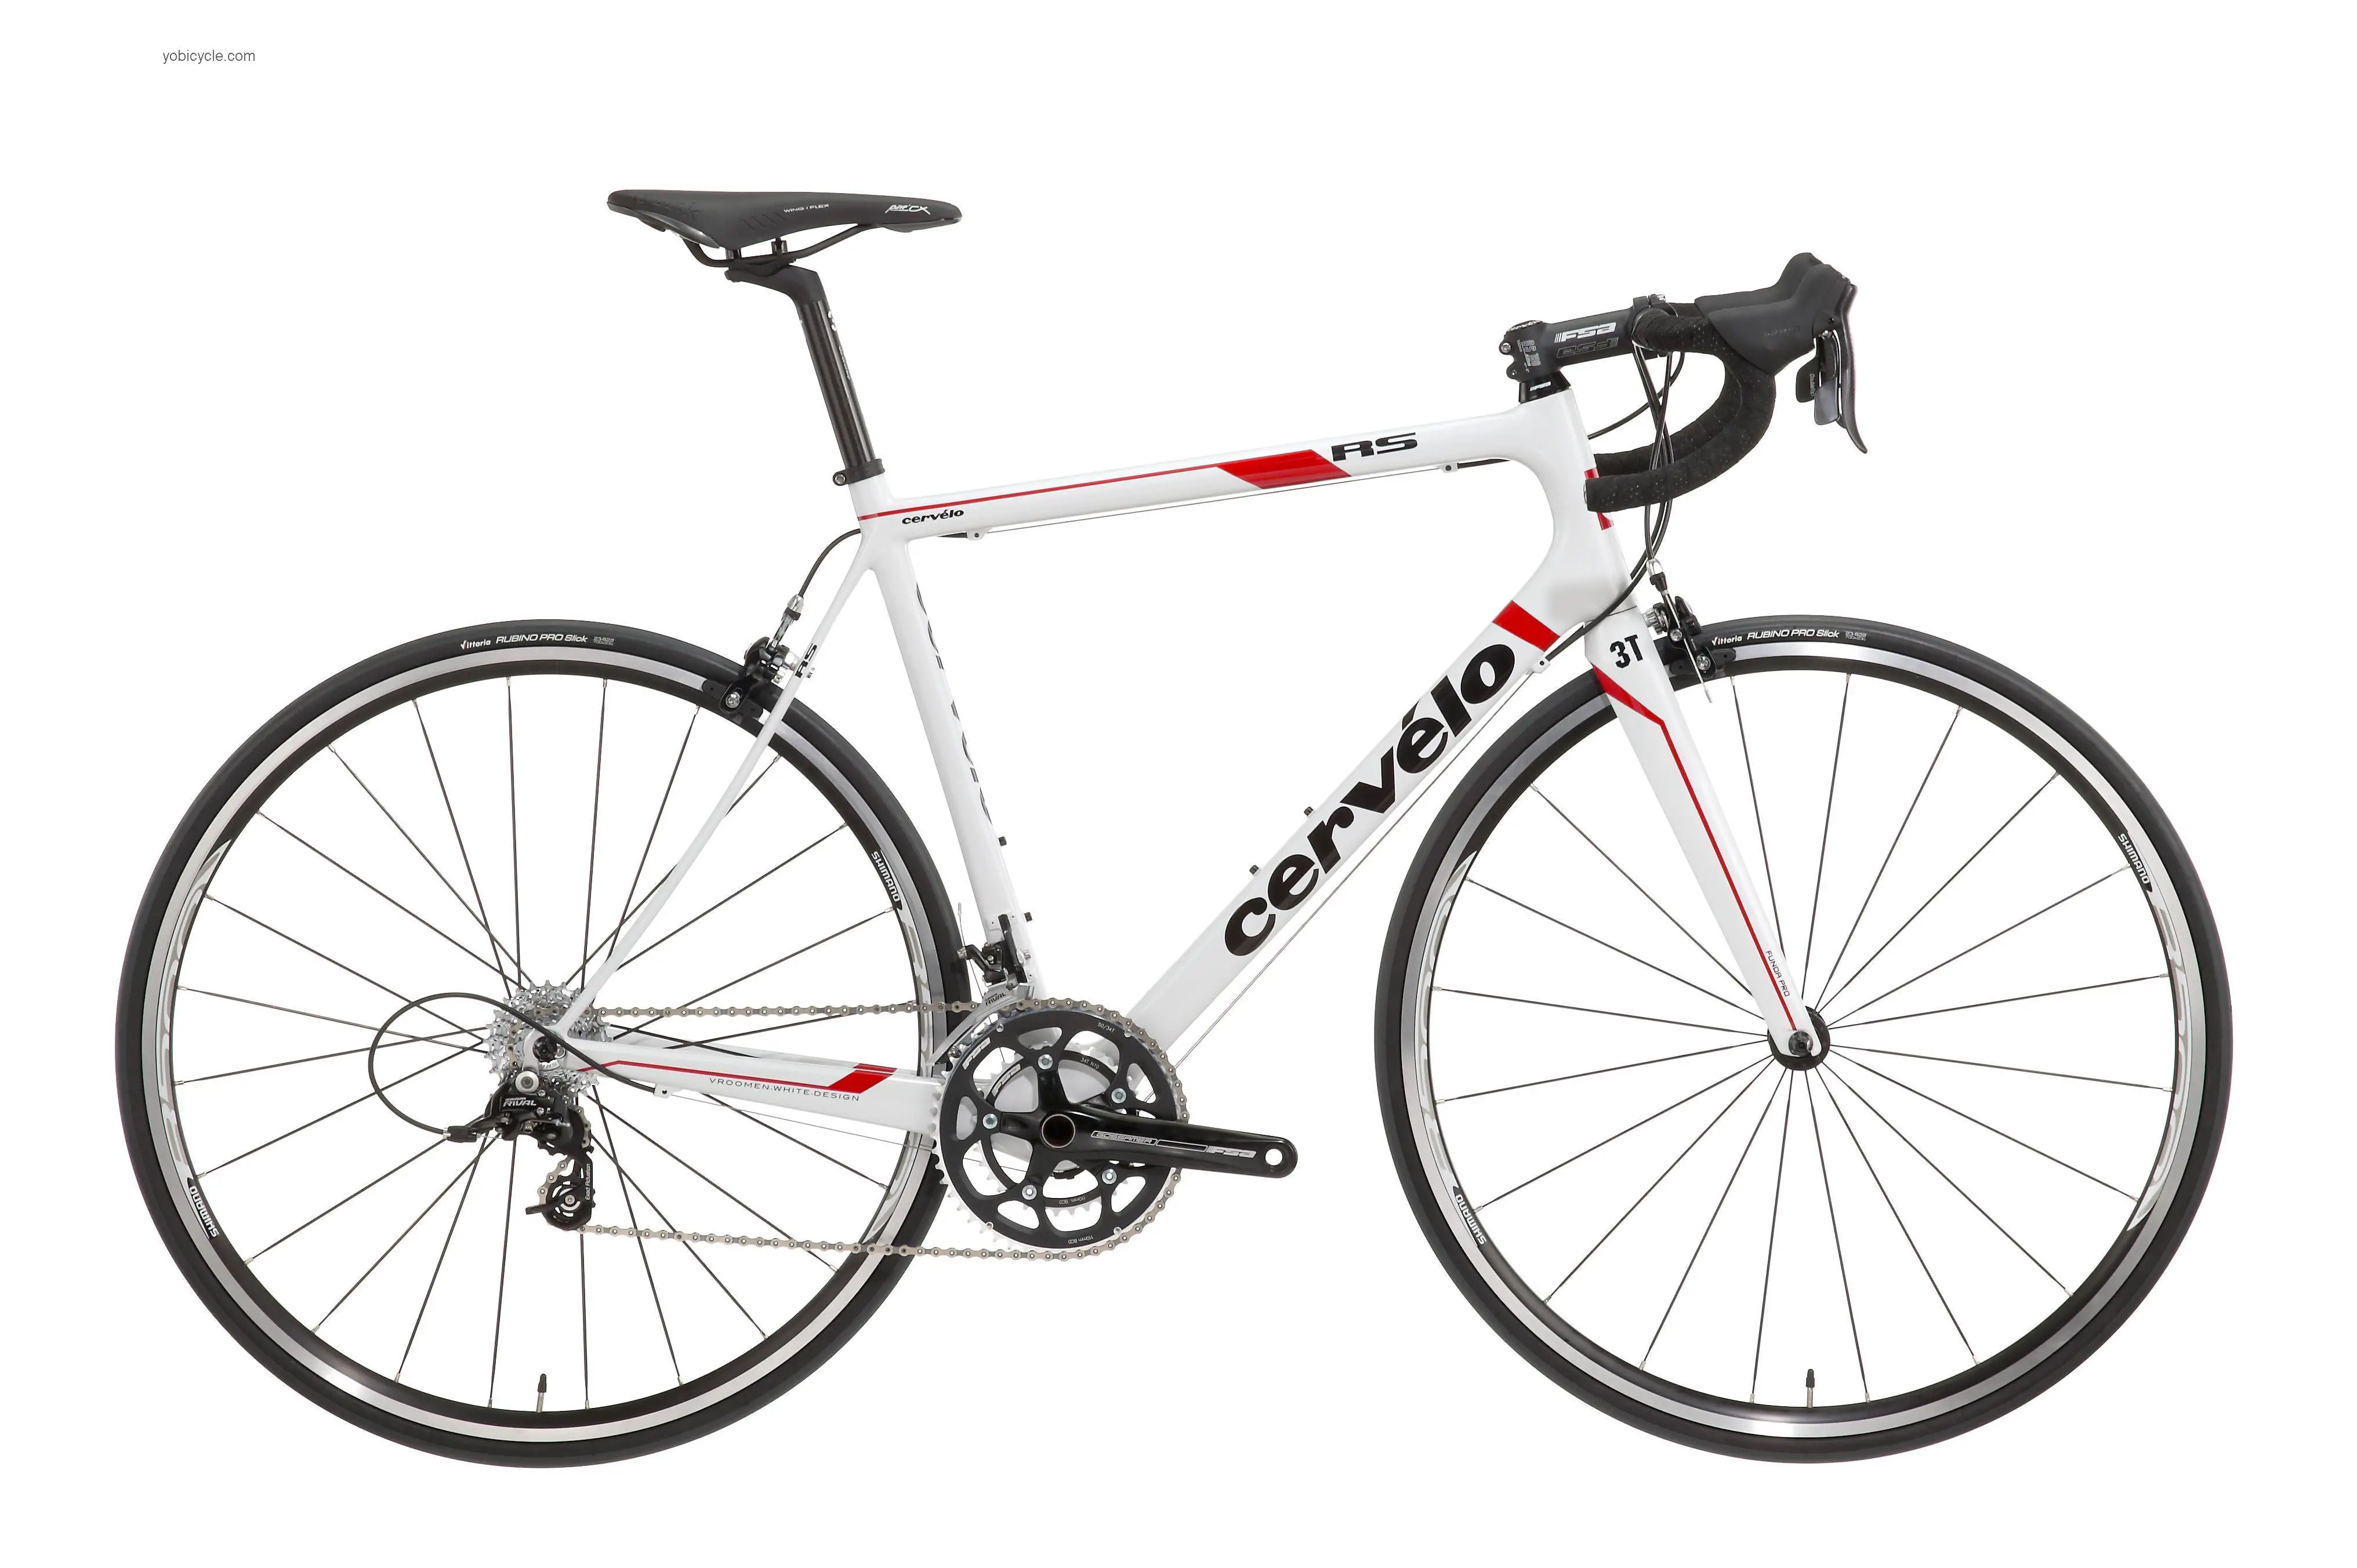 Cervelo RS Rival 2011 comparison online with competitors